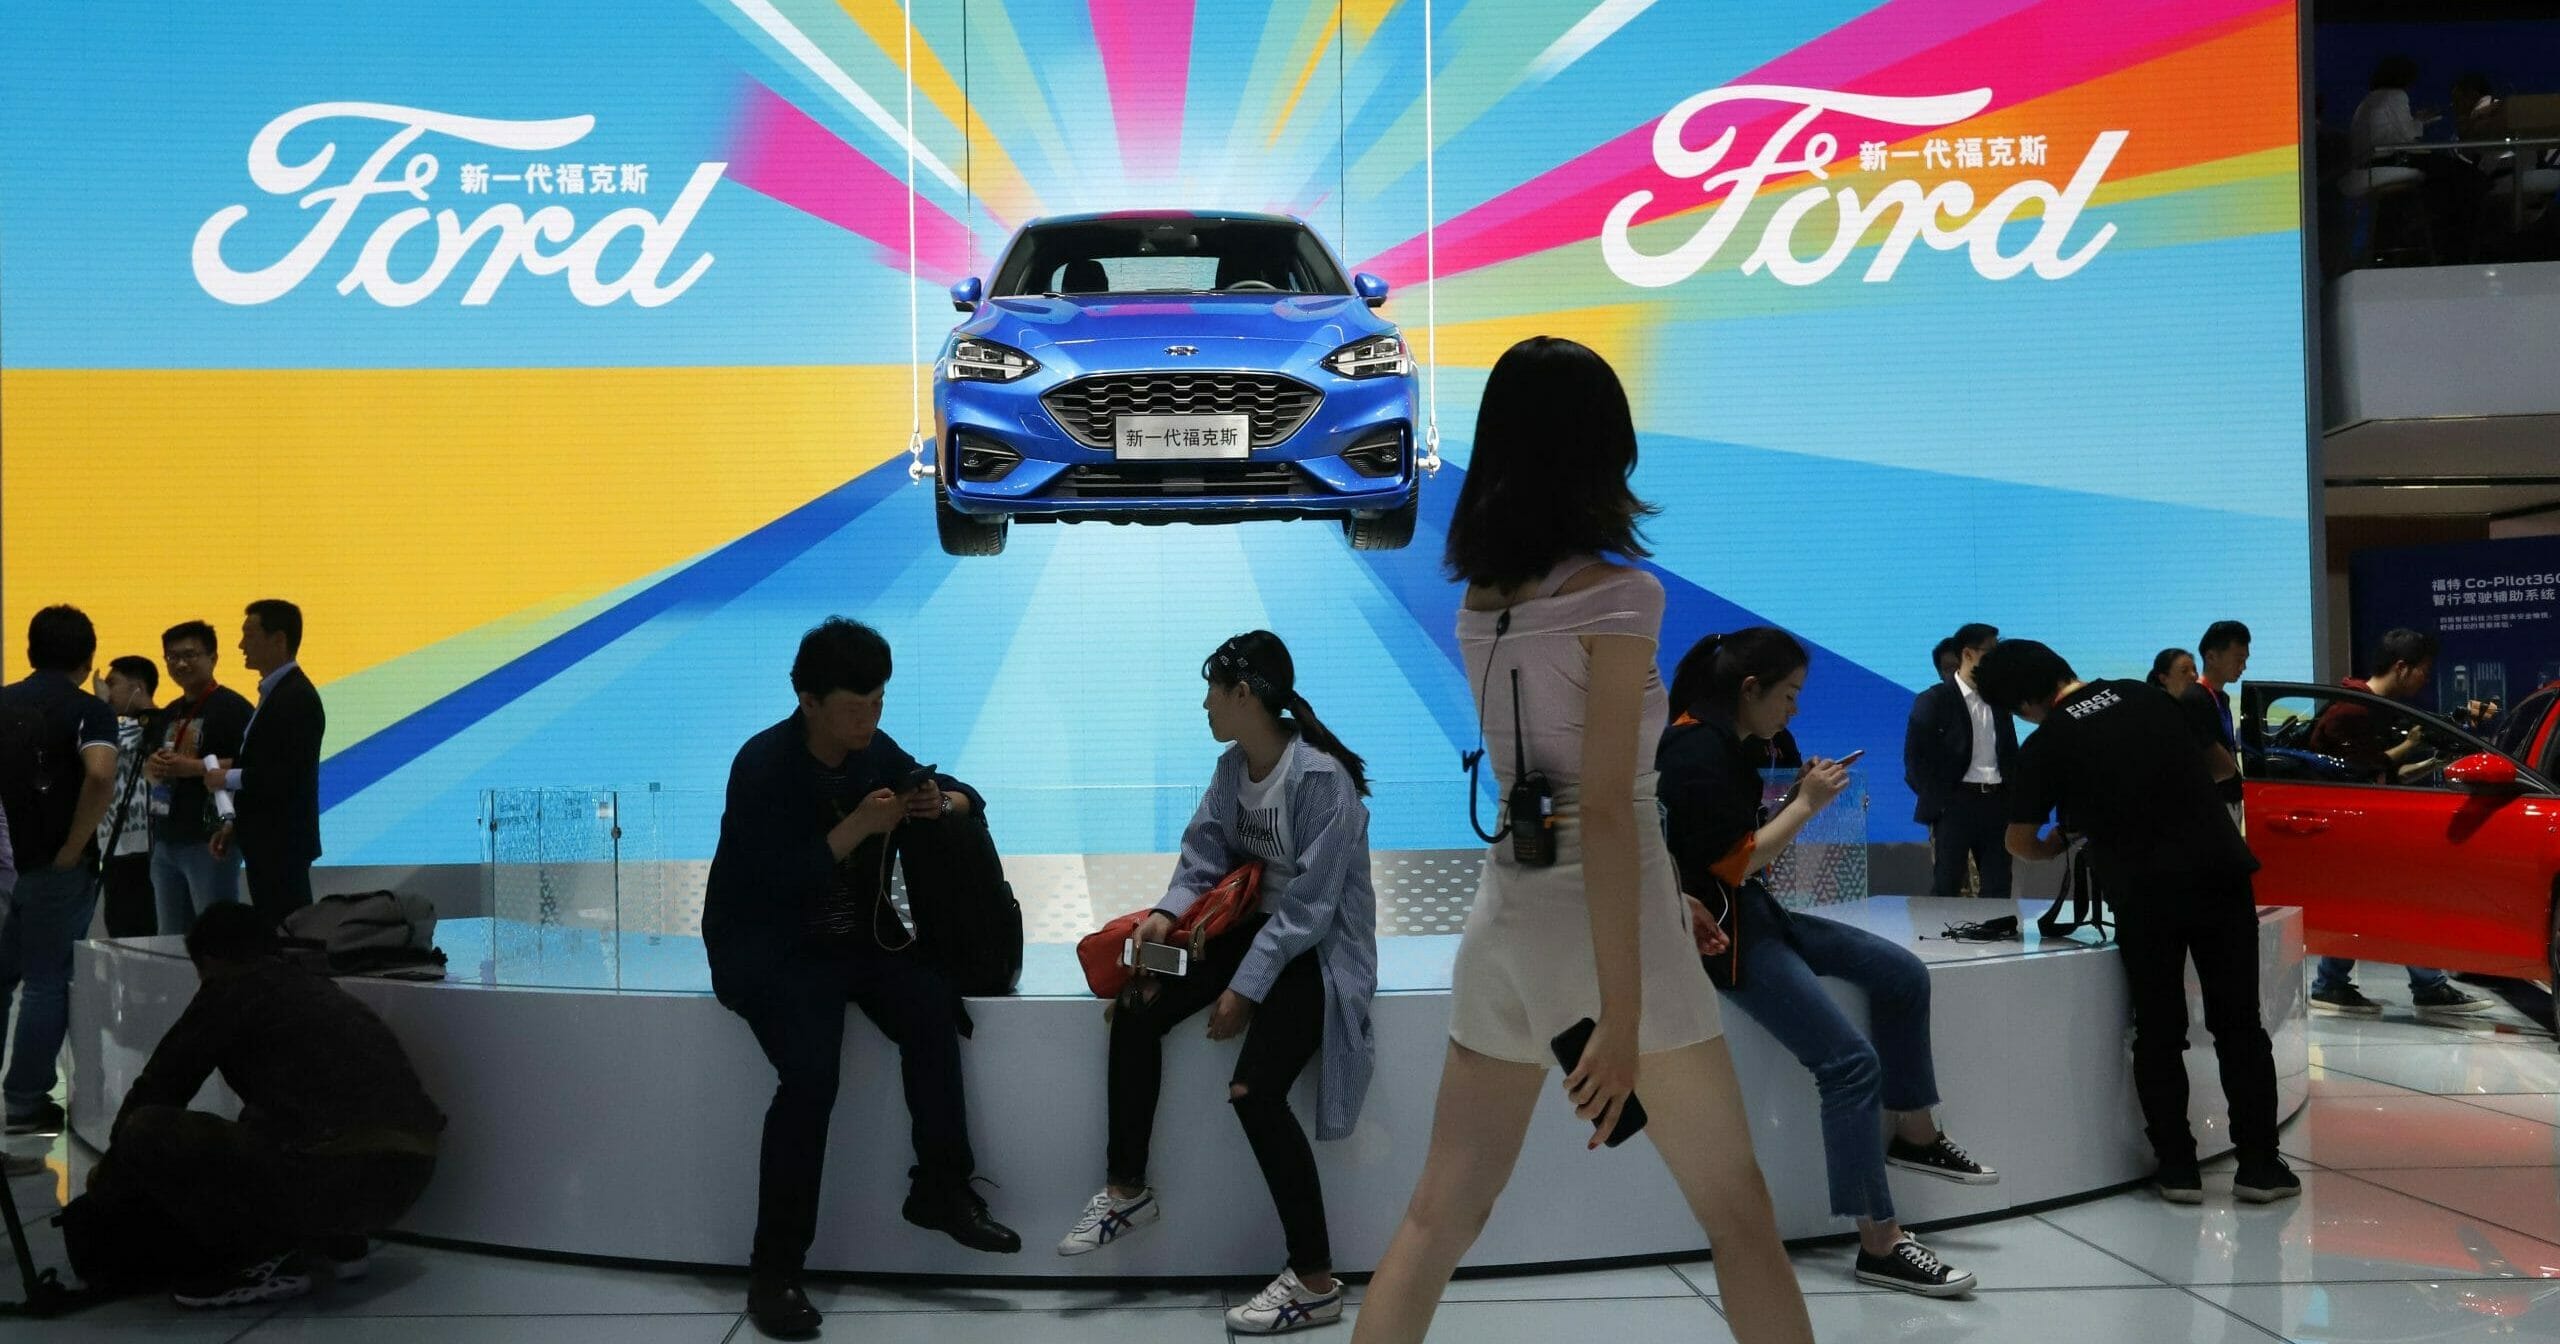 Attendees visit the Ford booth during the Auto China 2018 show held in Beijing on April 25, 2018.